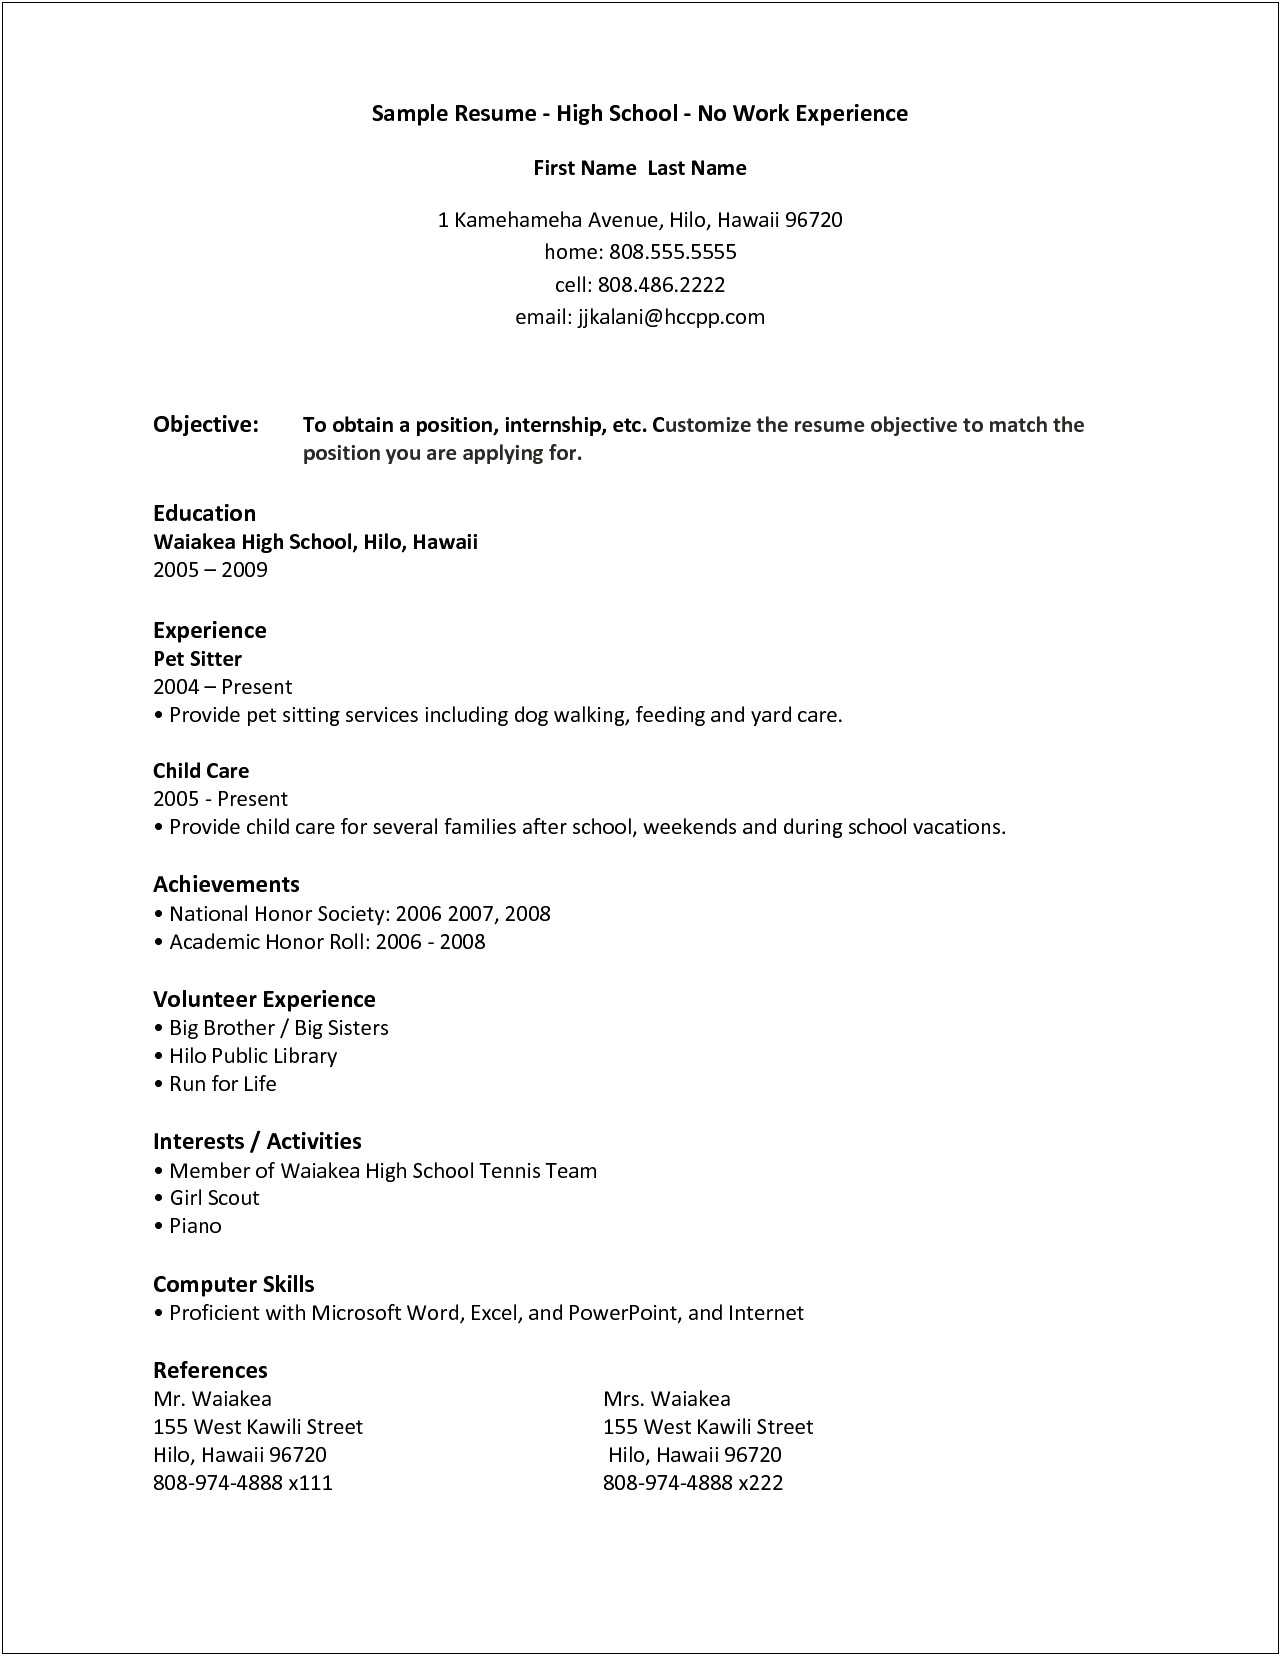 Sample Of High School Resume No Experience